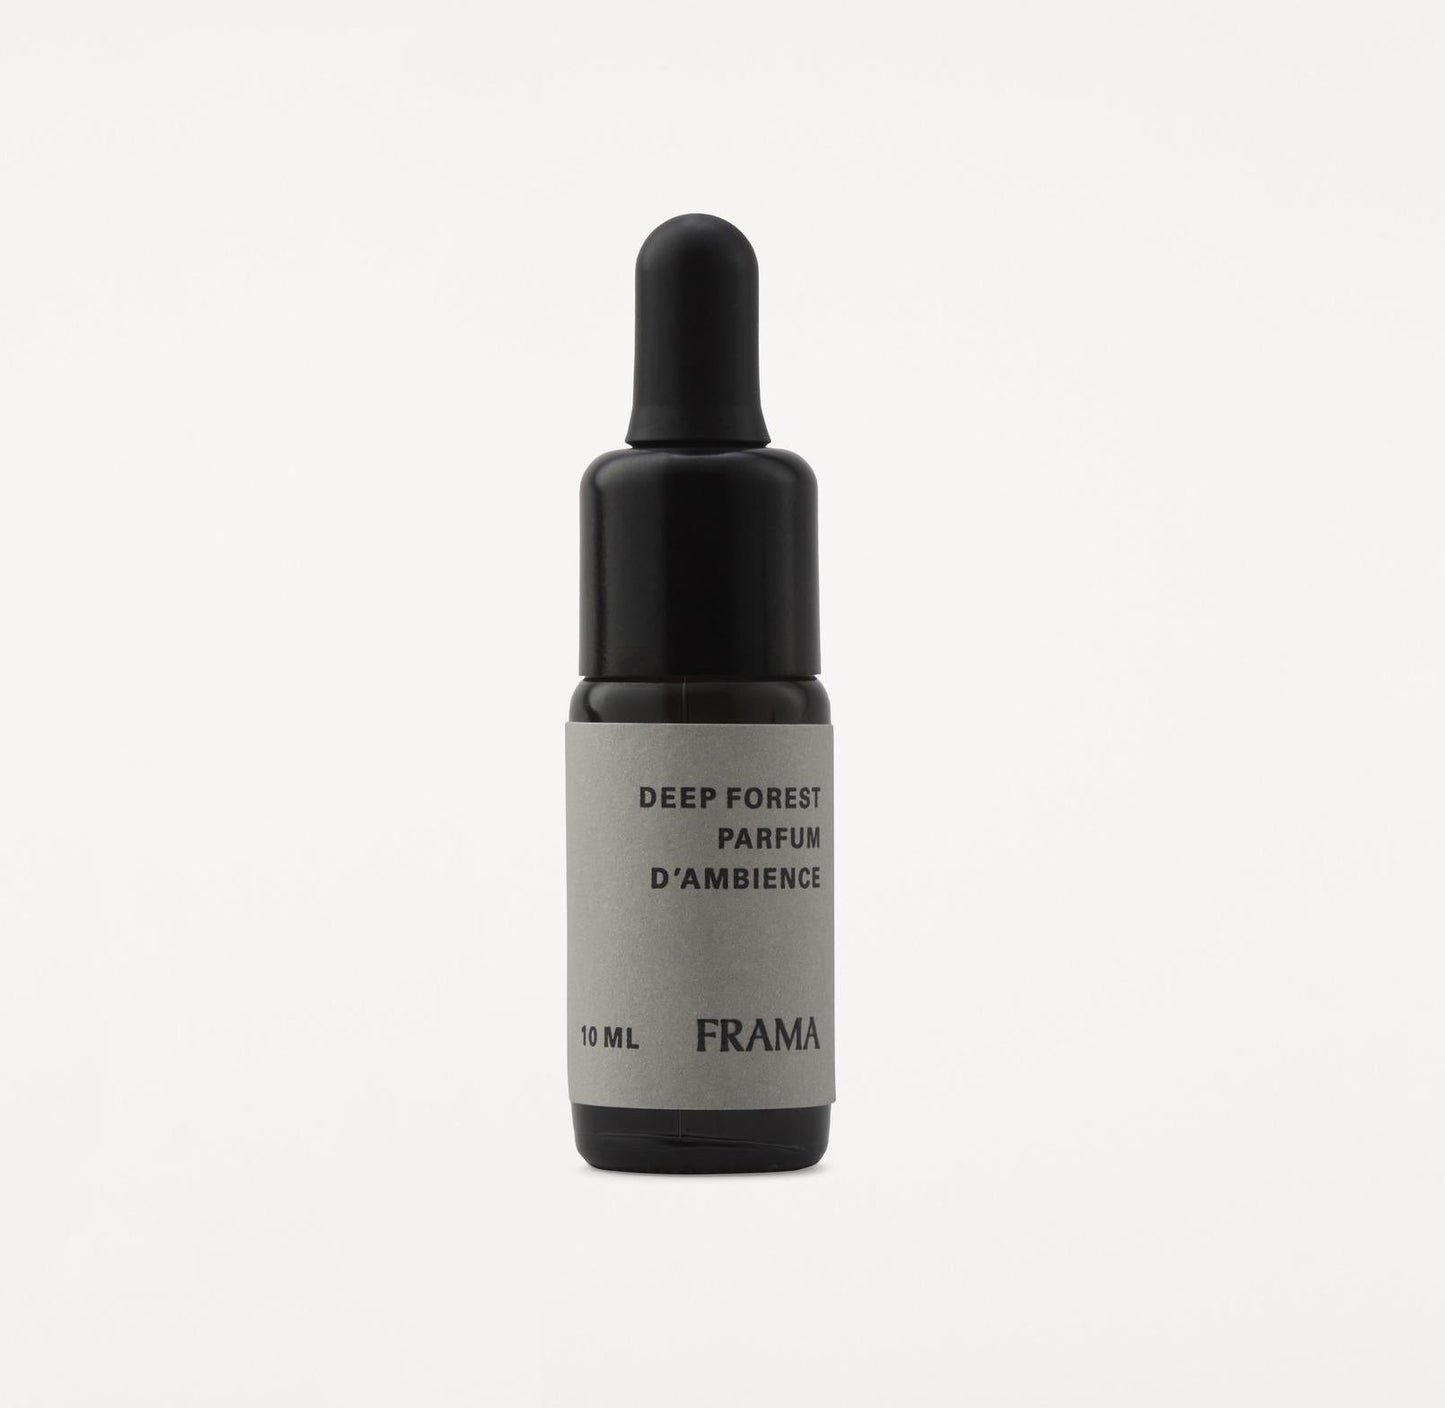 Deep Forest I Pure Essence I 10ml By FRAMA - THE PLANT SOCIETY